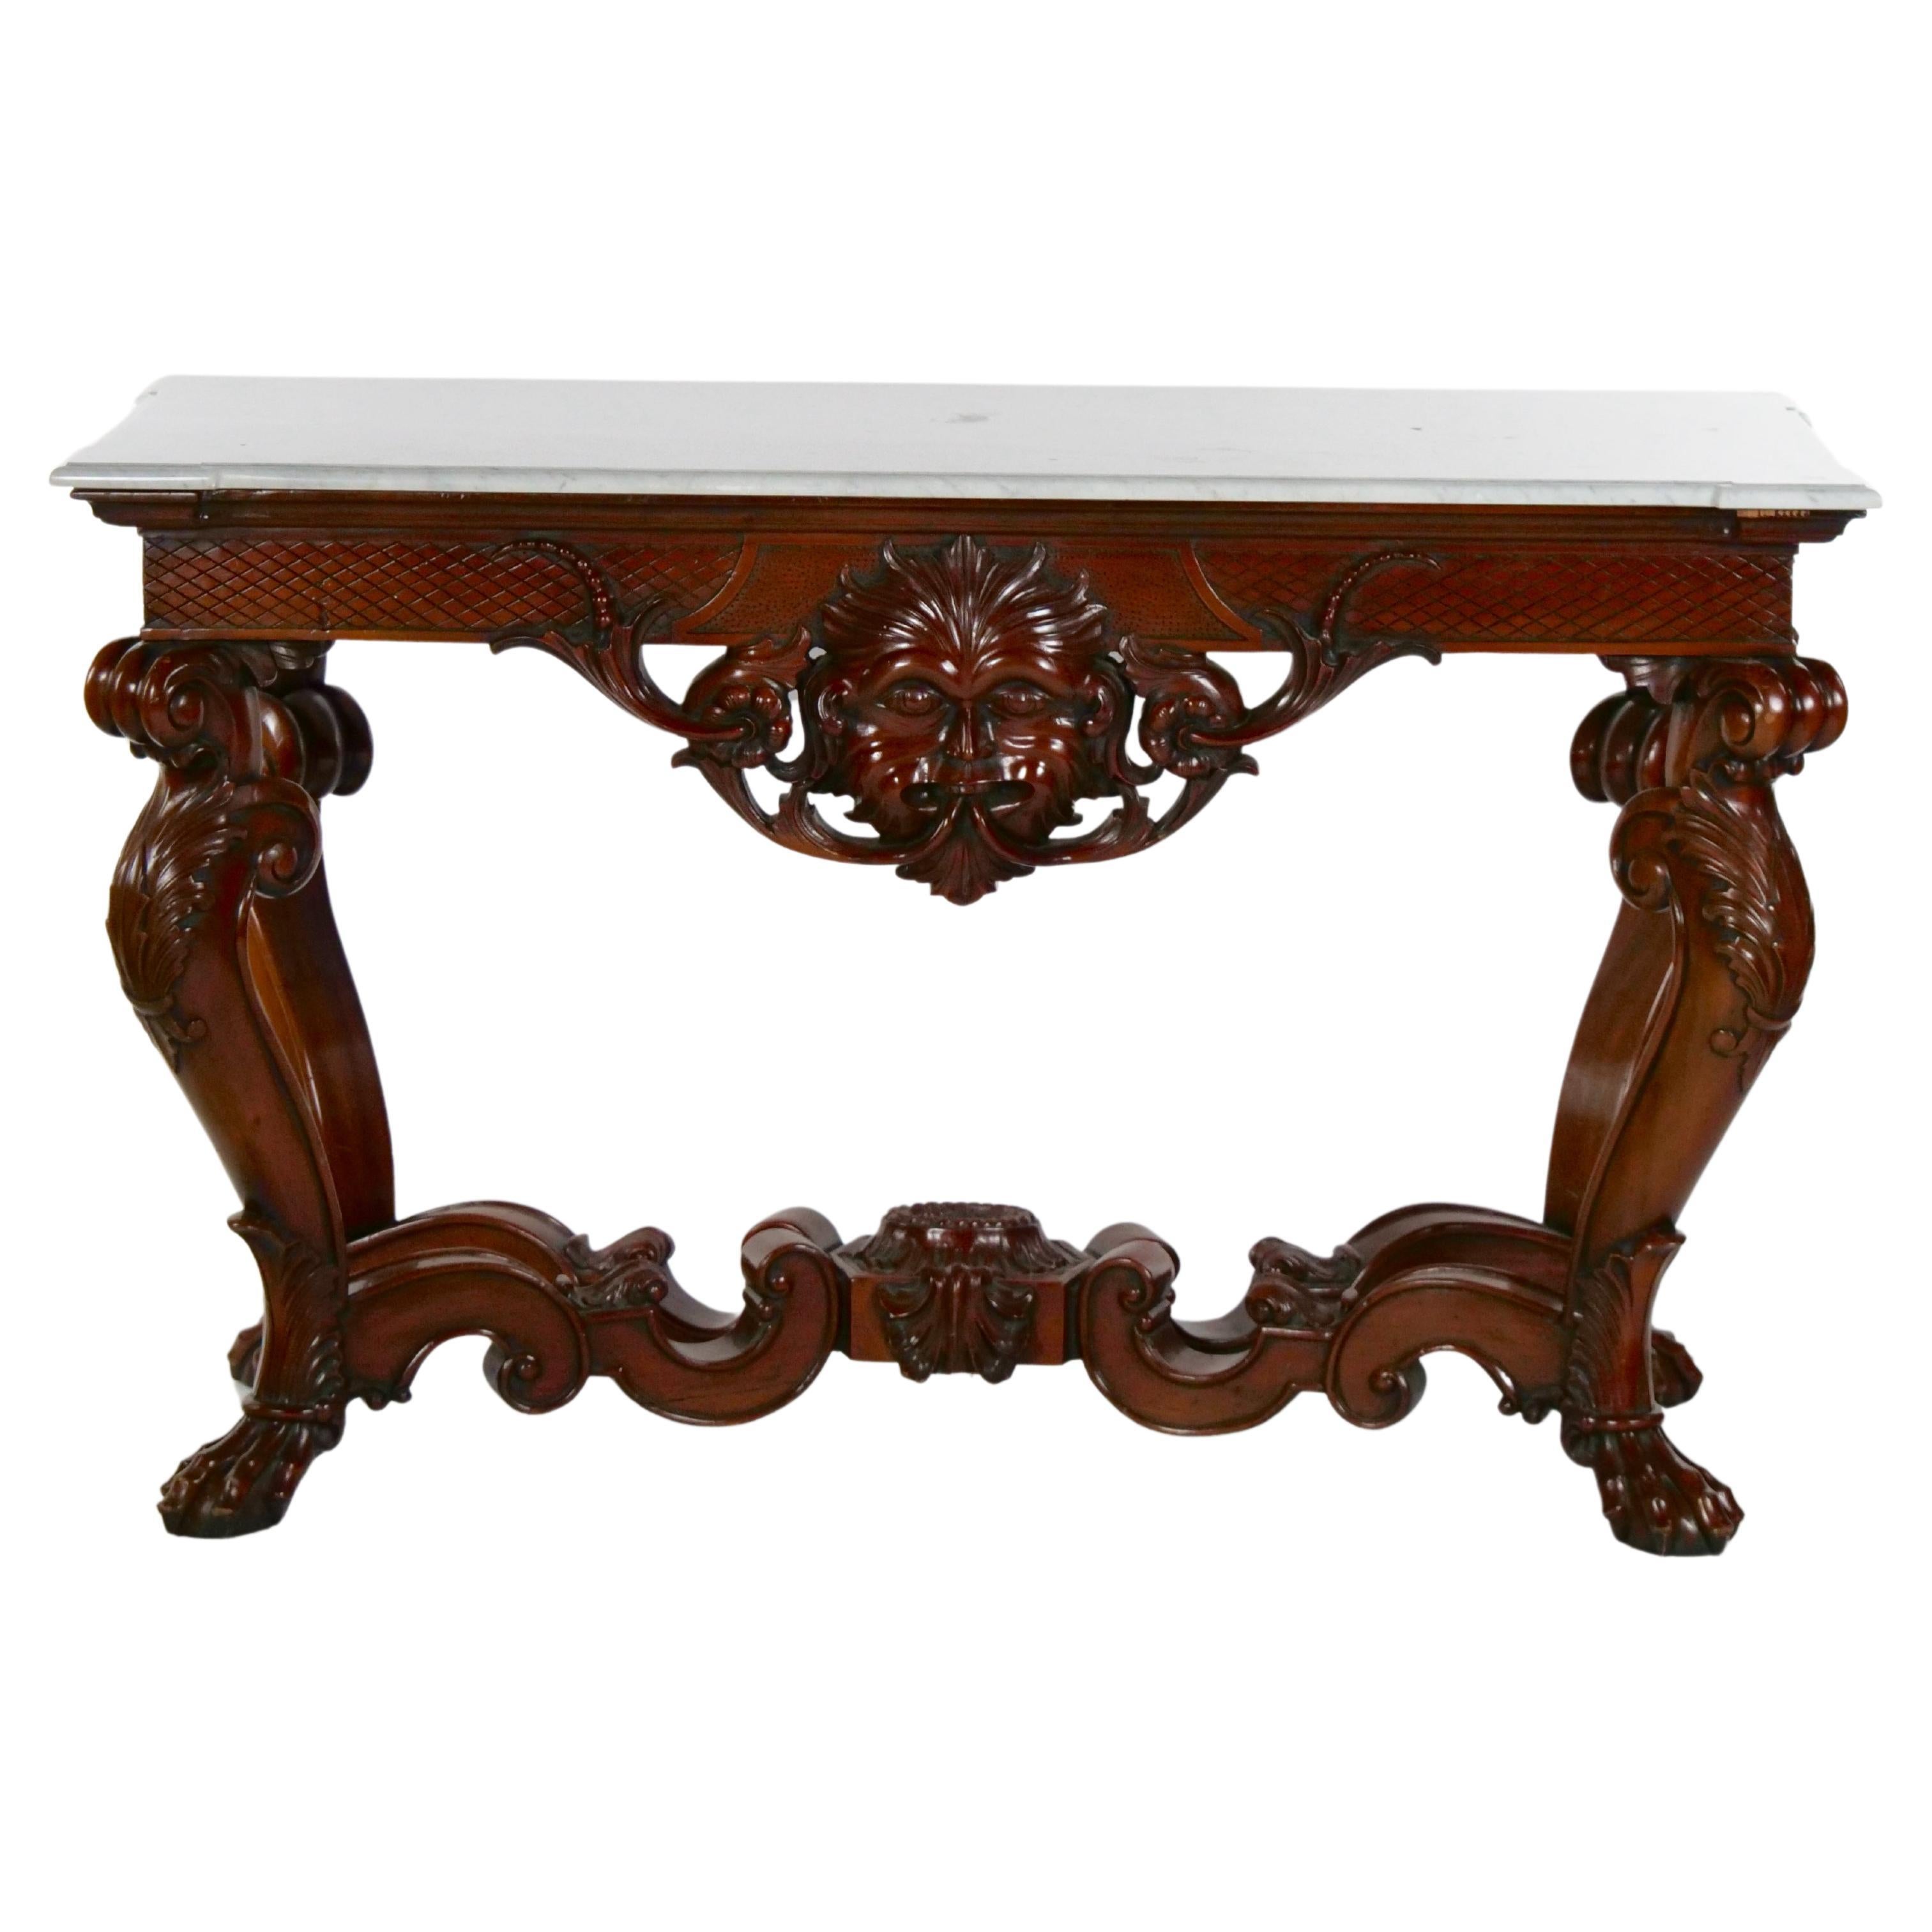 Grand Continental Rococo Style Carved Mahogany Foyer / Console Table